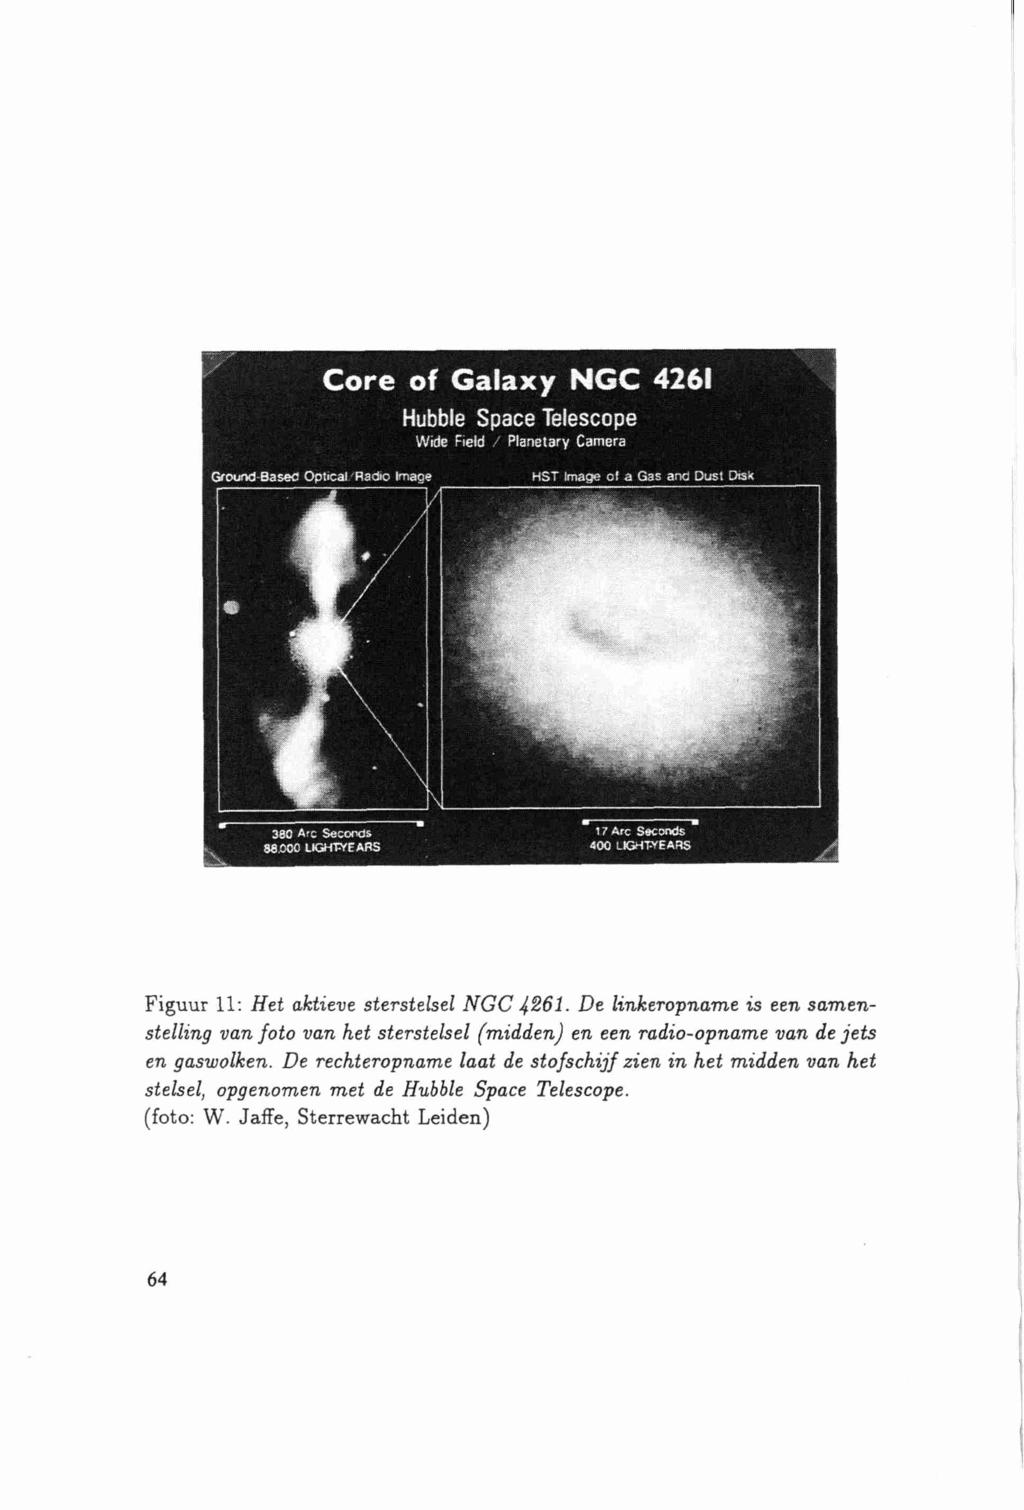 Core of Galaxy NGC 4261 Hubble Space Telescope Wide Field / Planetary Camera Ground Based OpticavRado Image HST Image of a Gas and Dust Disk 380 Arc Seconds 17 Arc Seconds v.